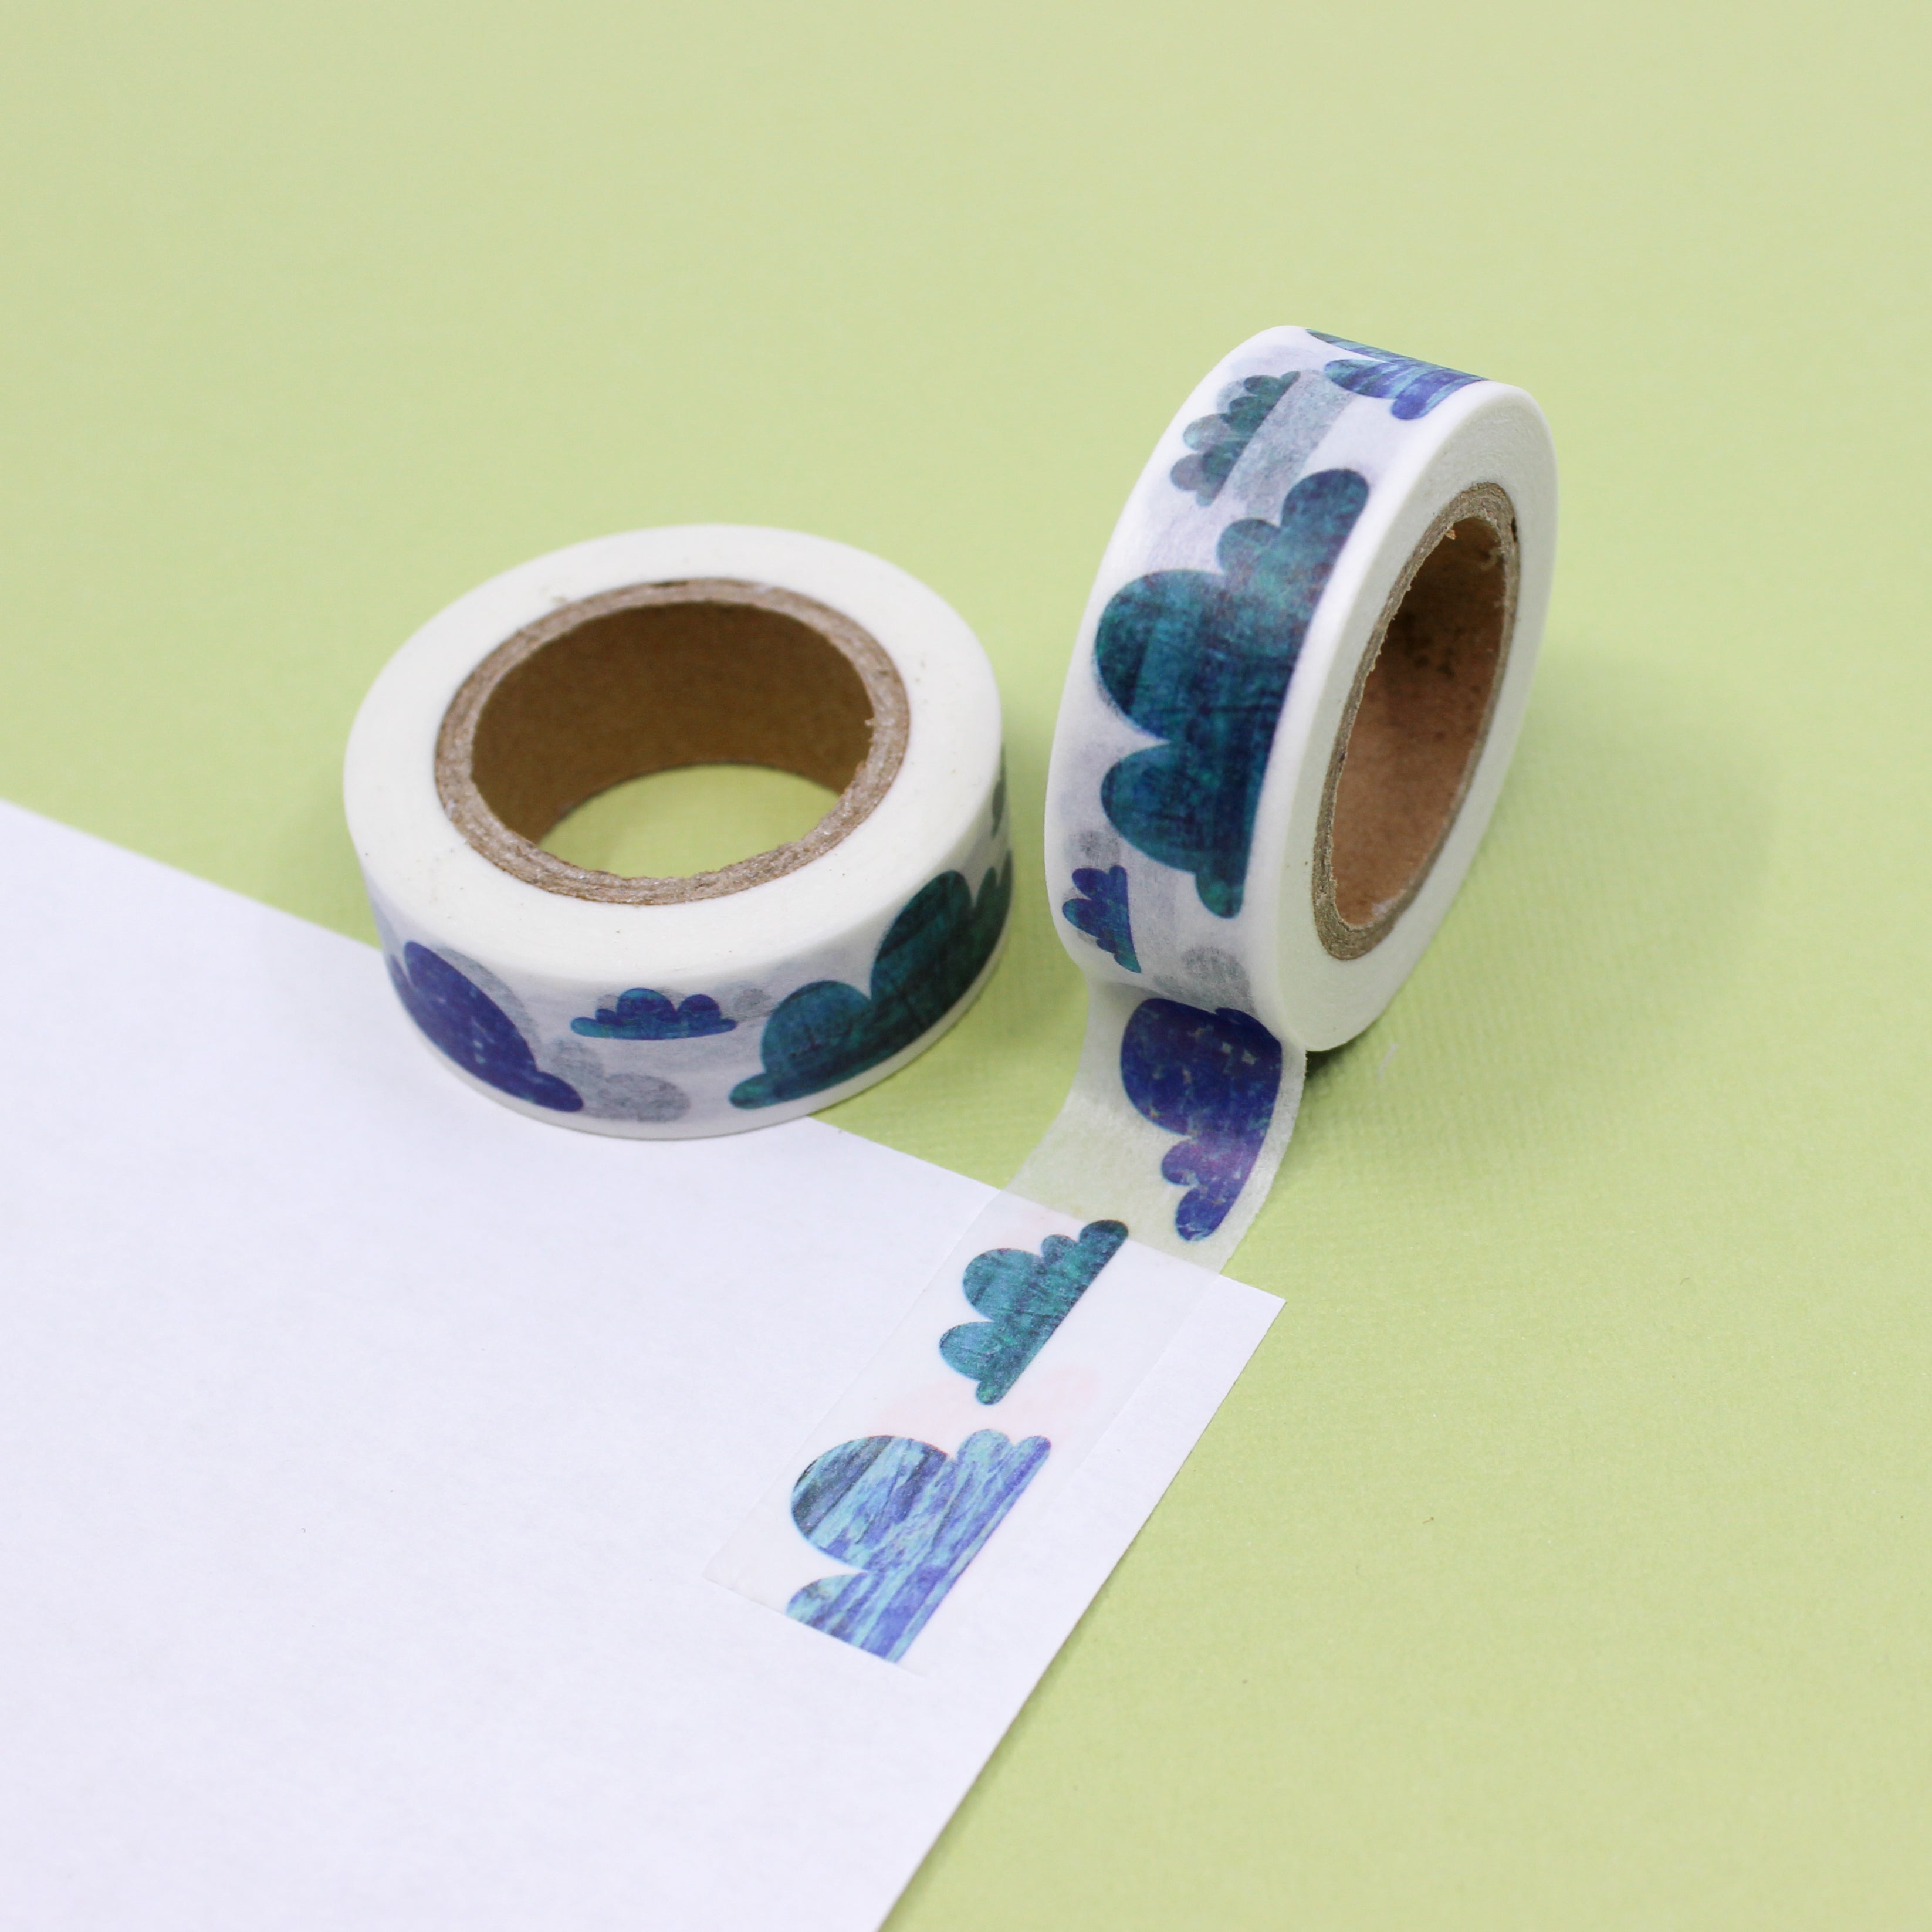 This is a blue clouds view themed washi tape from BBB Supplies Craft Shop